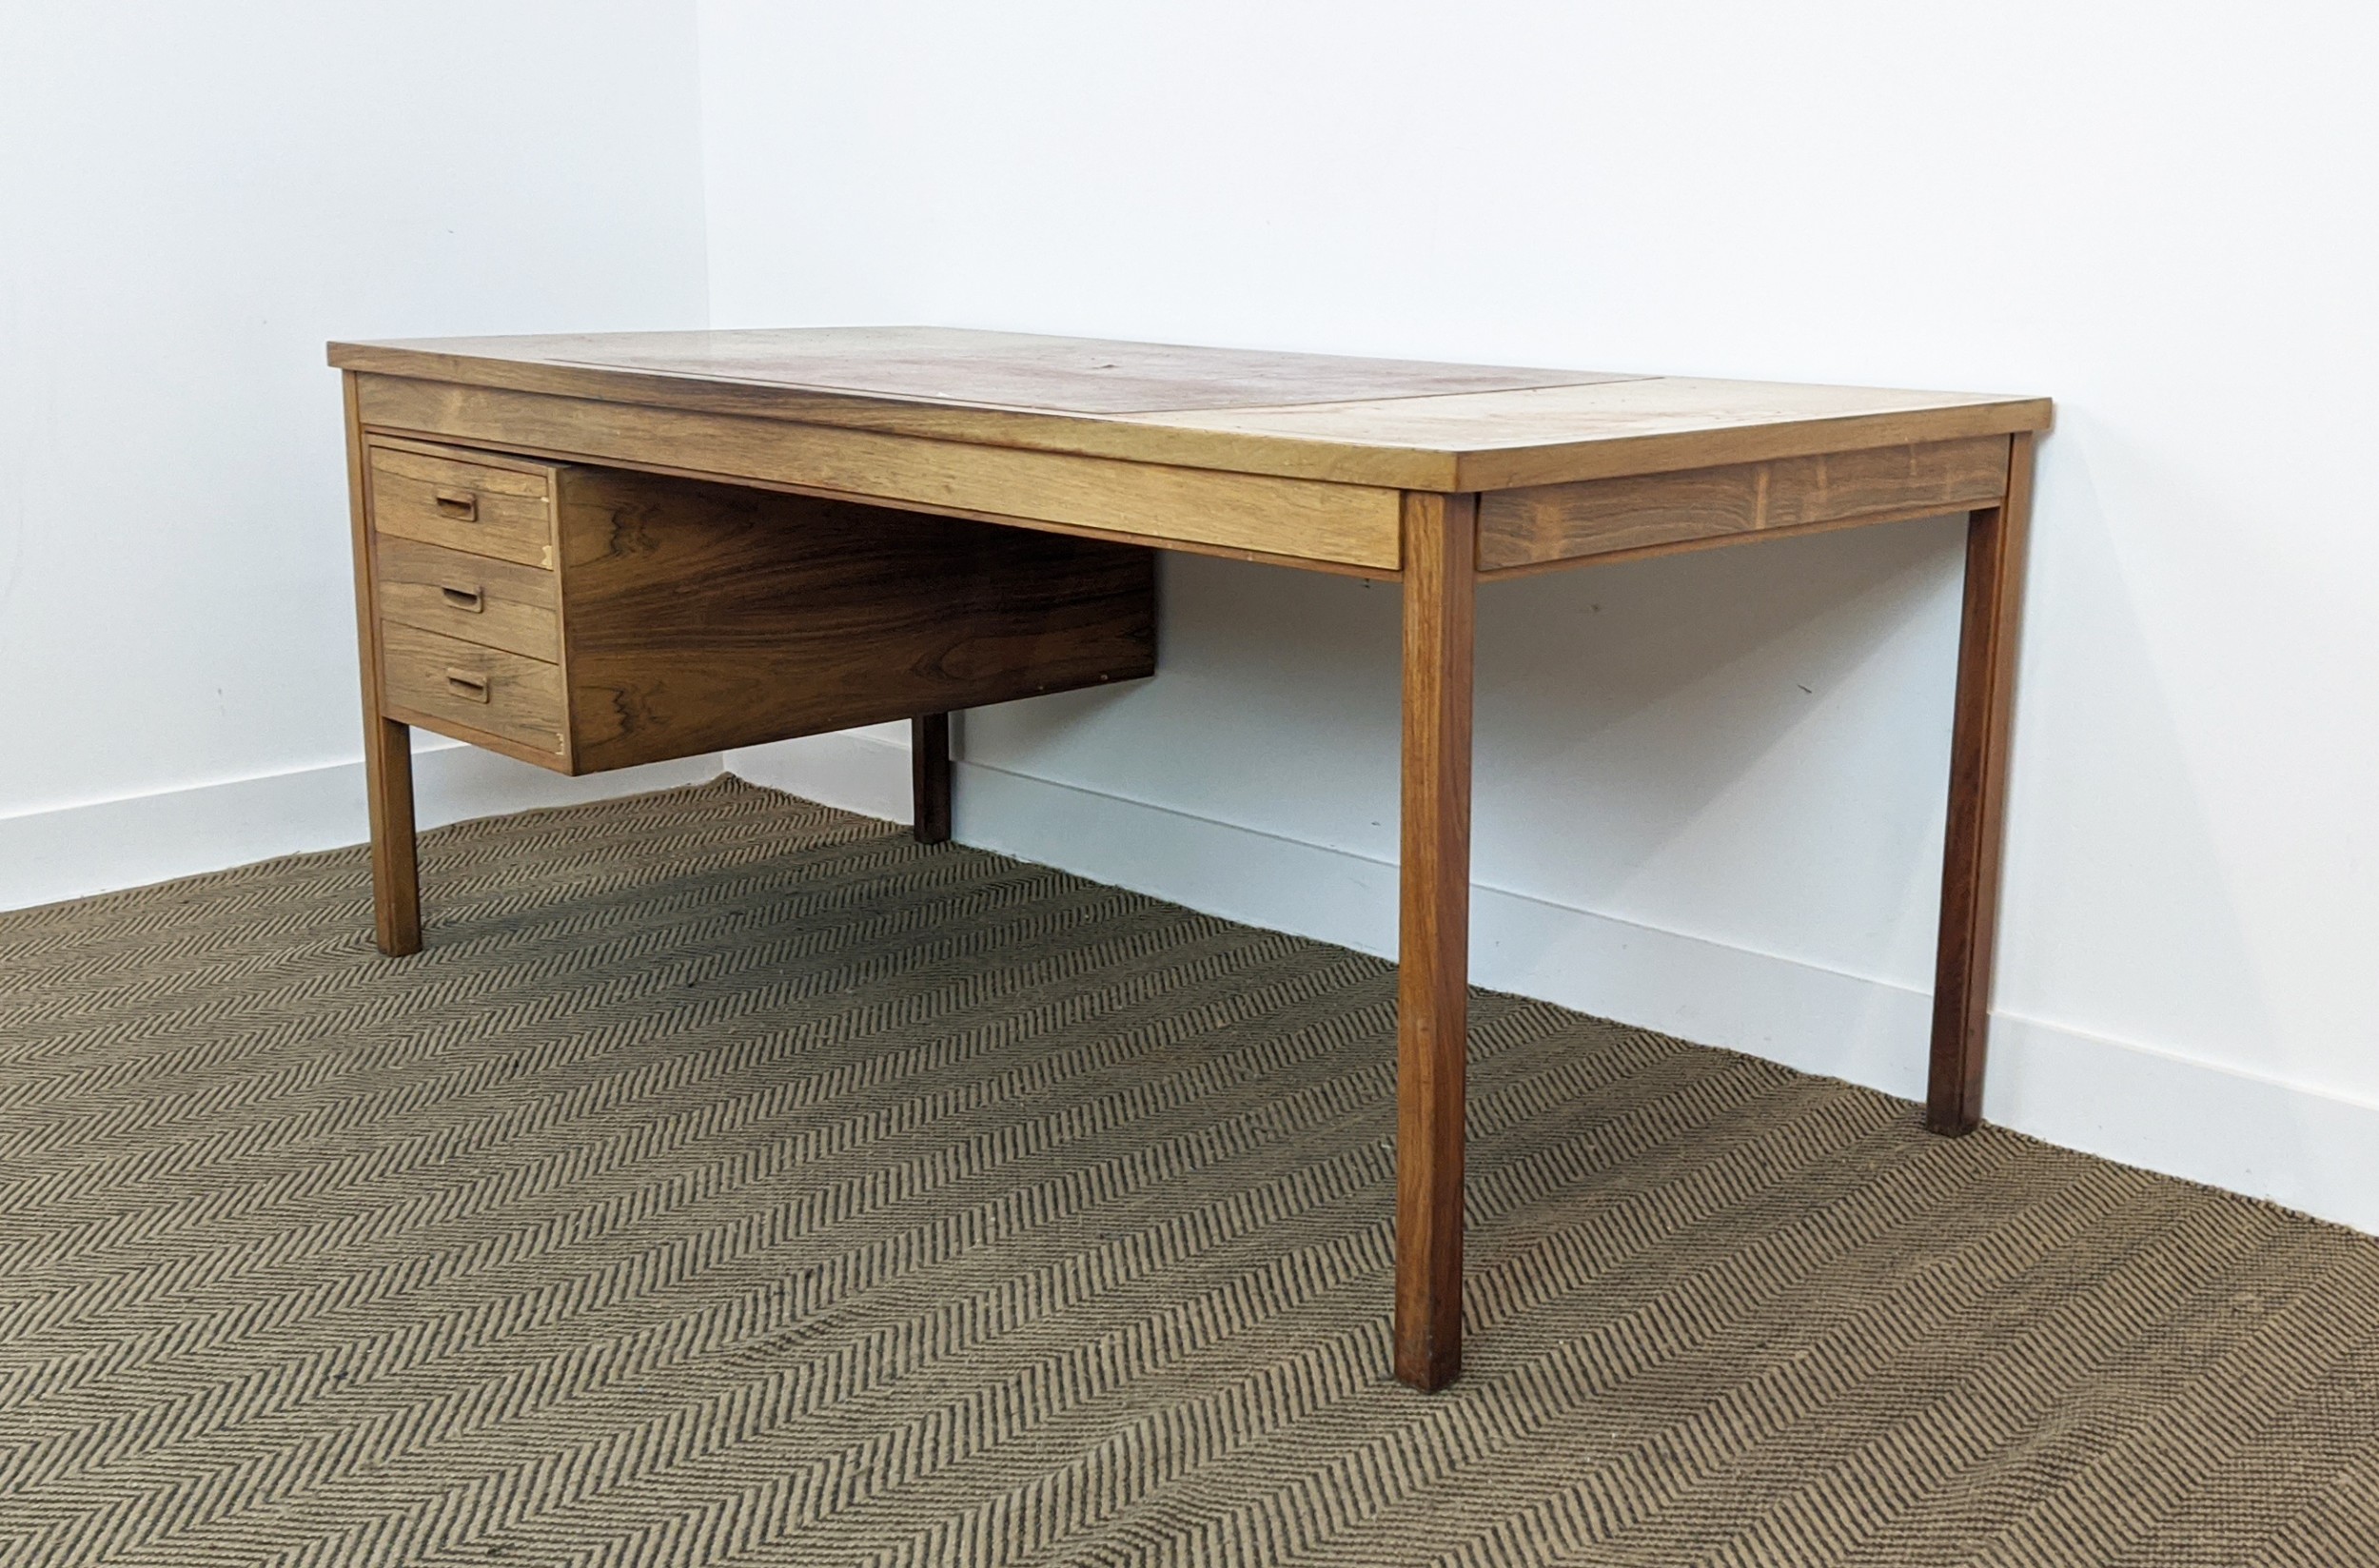 DESK, 171cm x 85.5cm x 73cm approx., with three drawers to one side. - Image 4 of 14